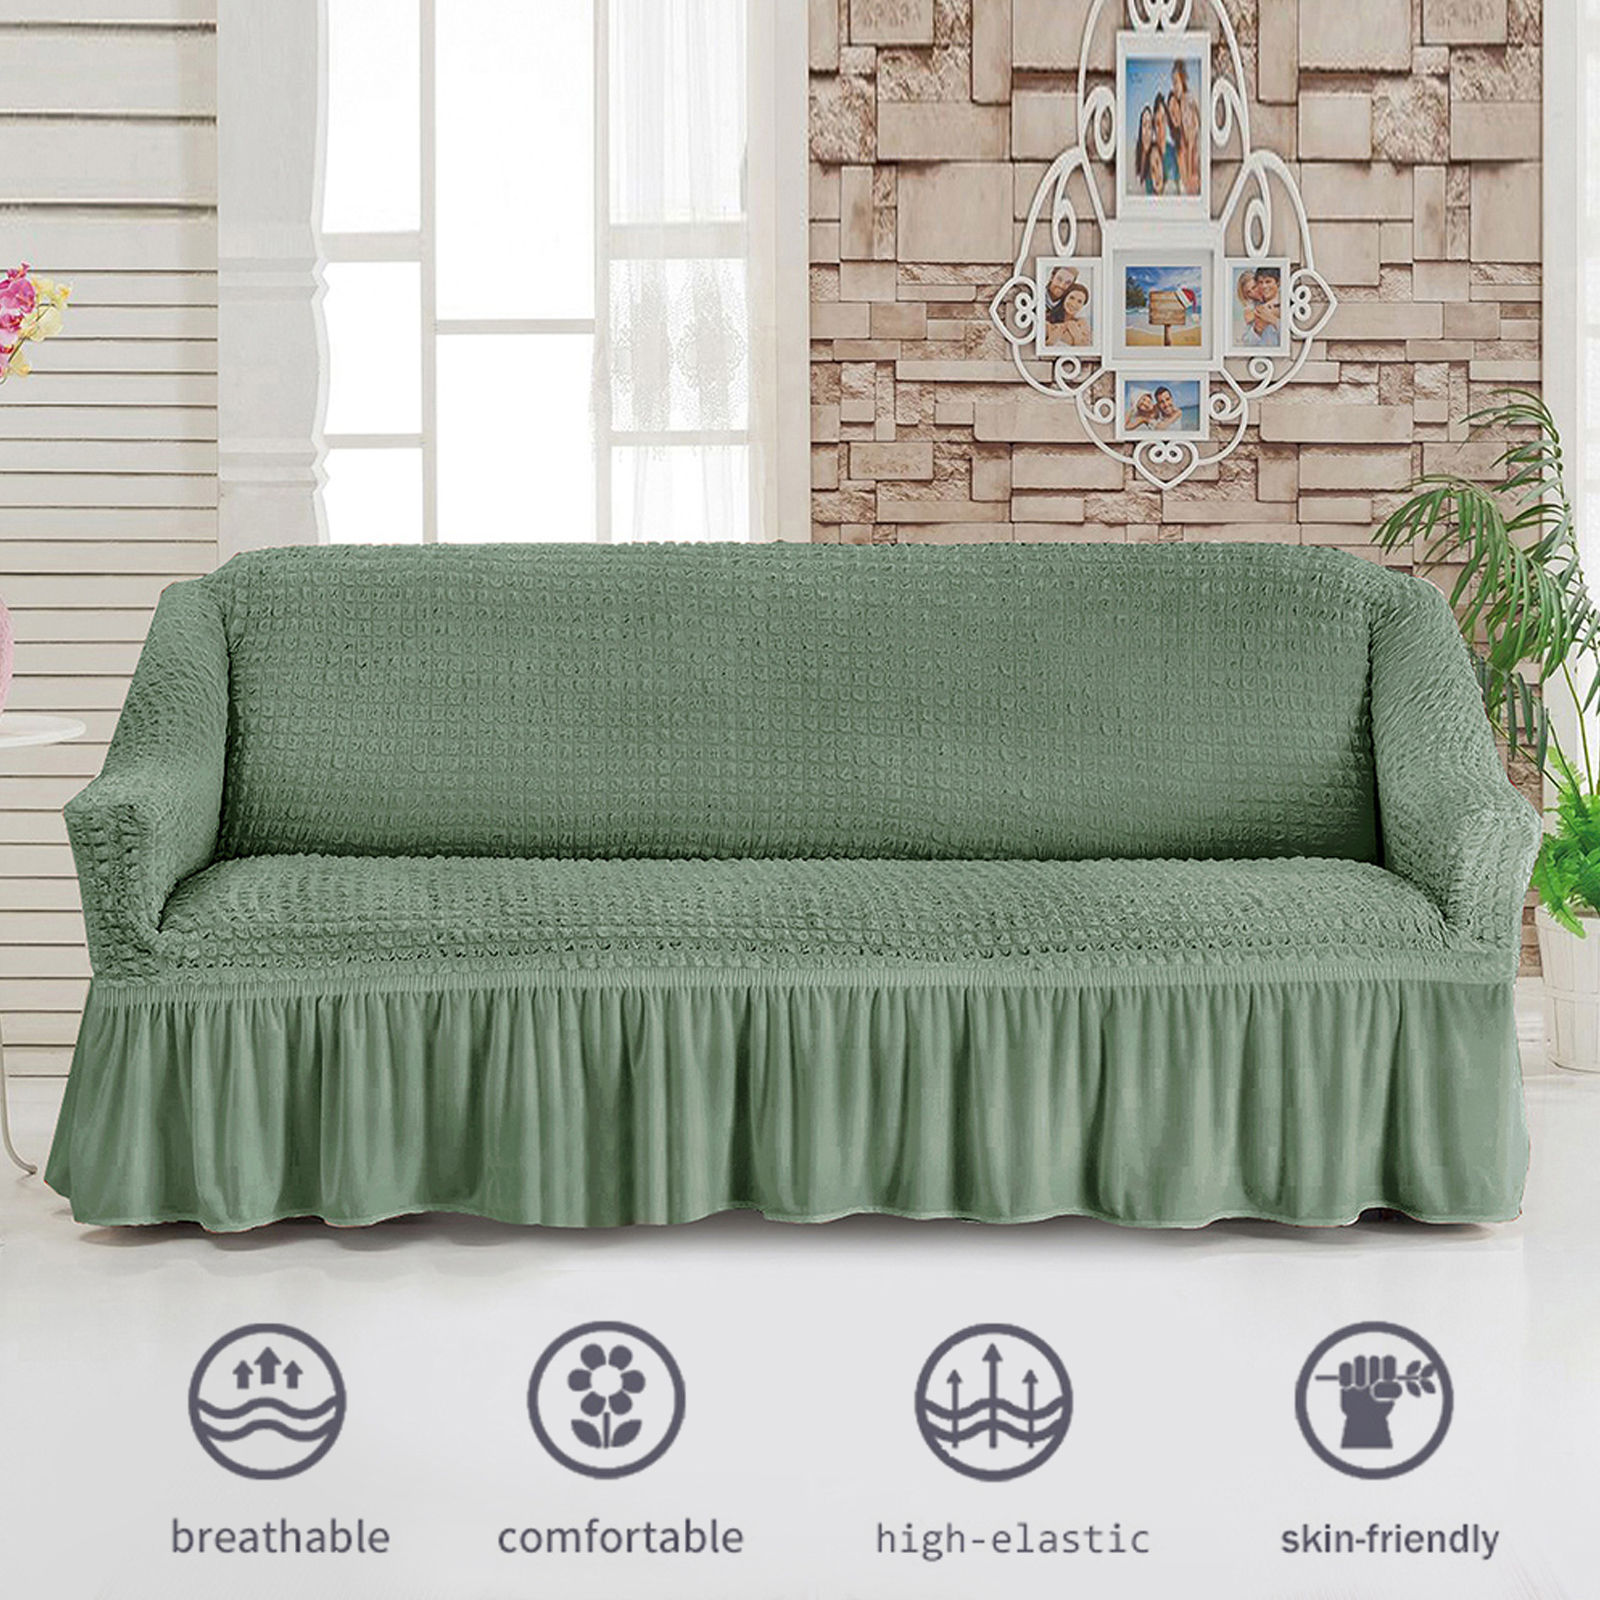 Stretch Sofa Slipcover, 3 Seater Sofa Slipcovers With Skirt With Armless Soft Sofa Cover Elastic Straps Sofa Slipcover For Living Room Kids Pets-Green B-Small